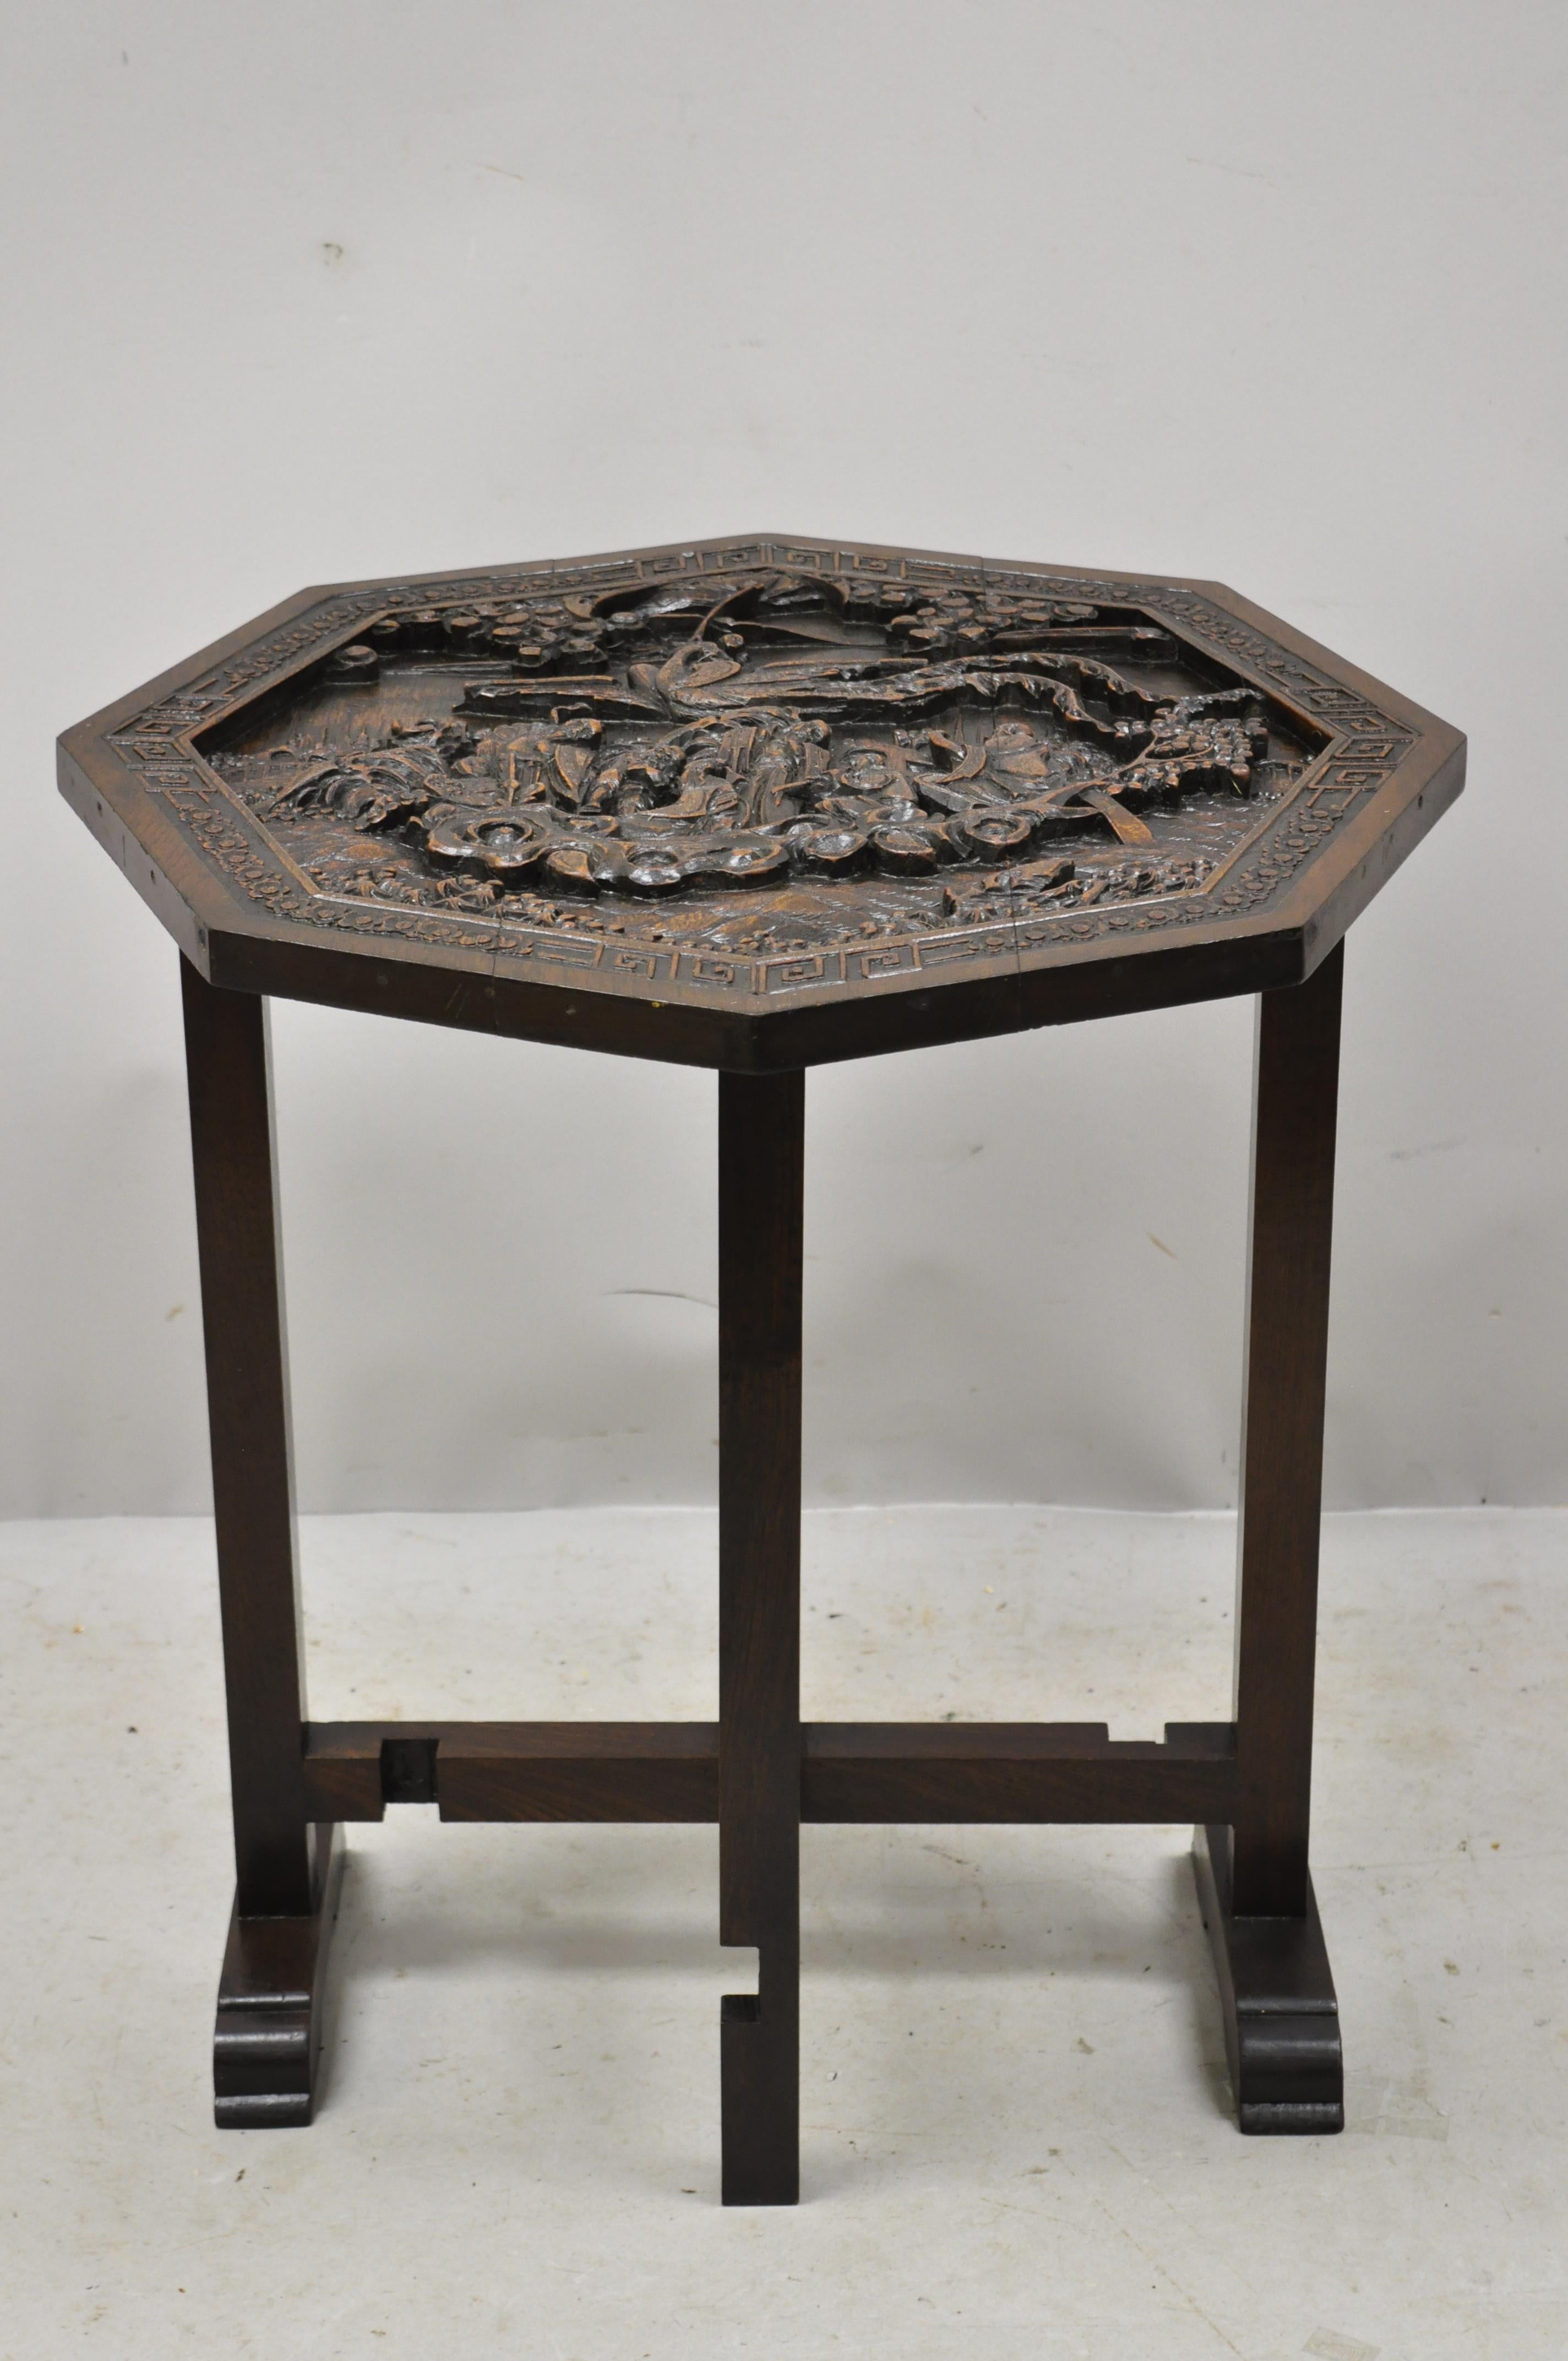 Antique Chinese Carved Hardwood Folding Gate Leg Table with Figural Carvings In Good Condition For Sale In Philadelphia, PA